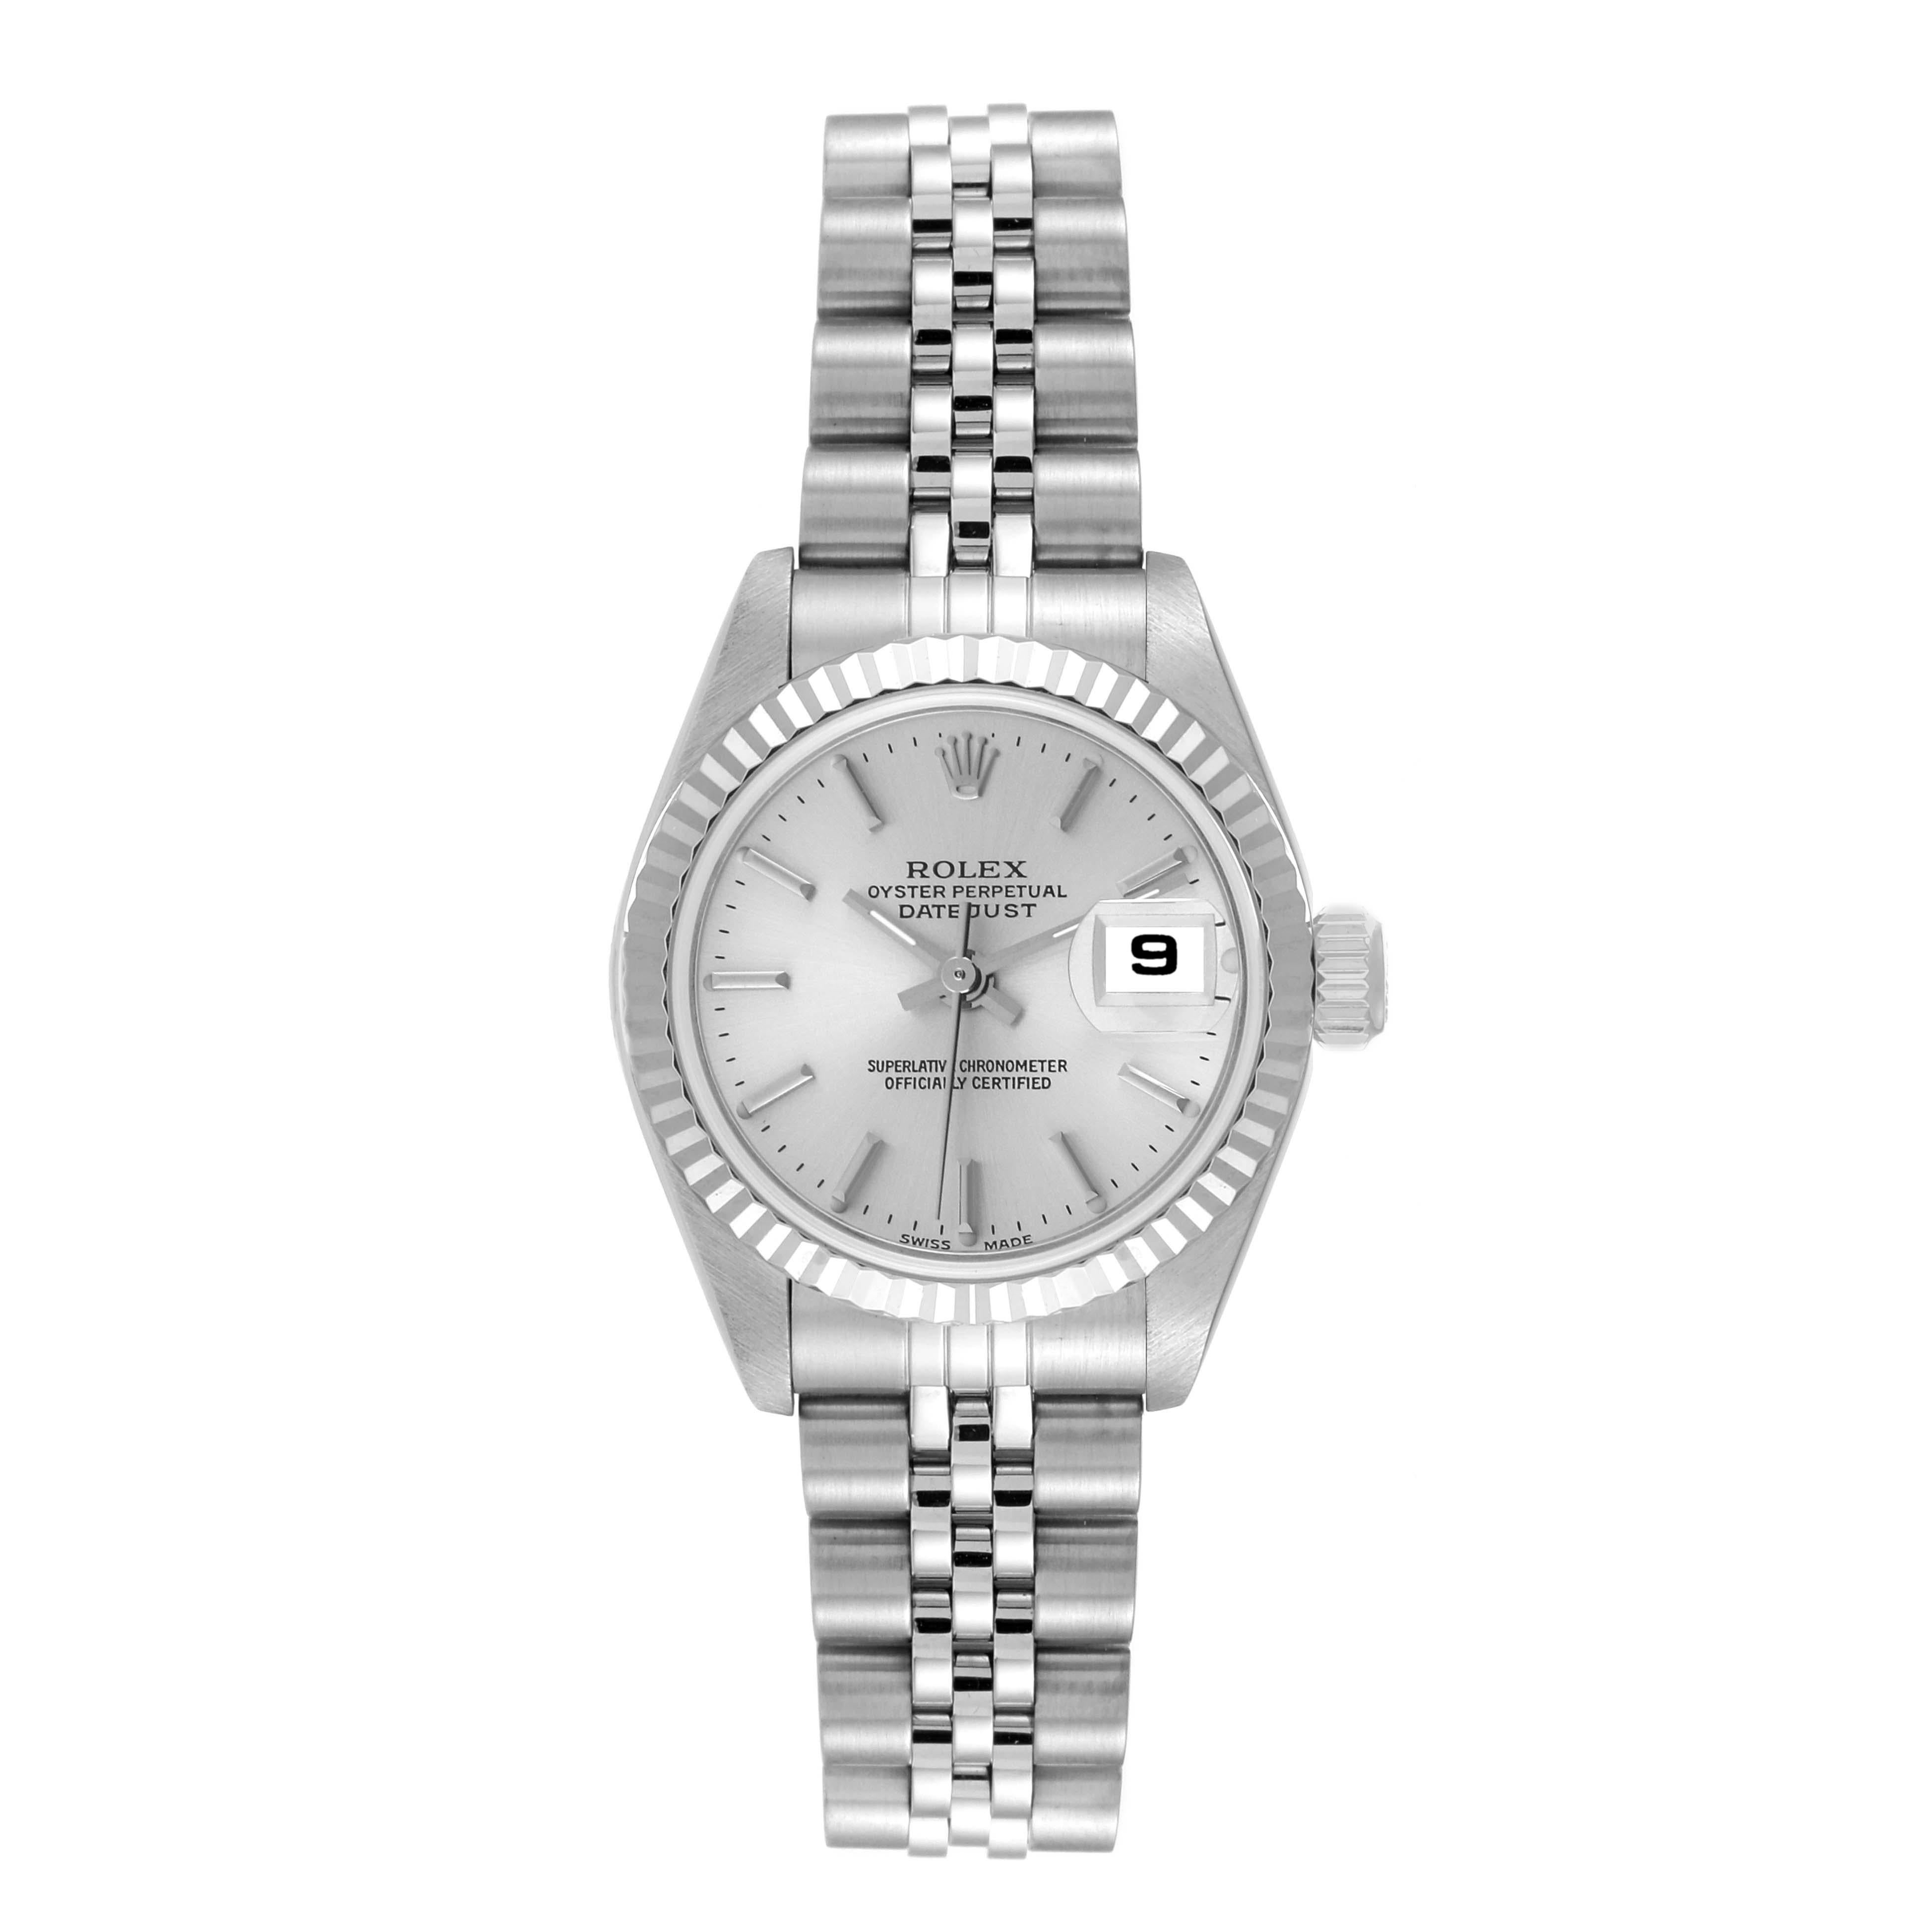 Rolex Datejust 26 Steel White Gold Silver Dial Ladies Watch 79174 Box Papers. Officially certified chronometer automatic self-winding movement. Stainless steel oyster case 26.0 mm in diameter. Rolex logo on a crown. 18k white gold fluted bezel.